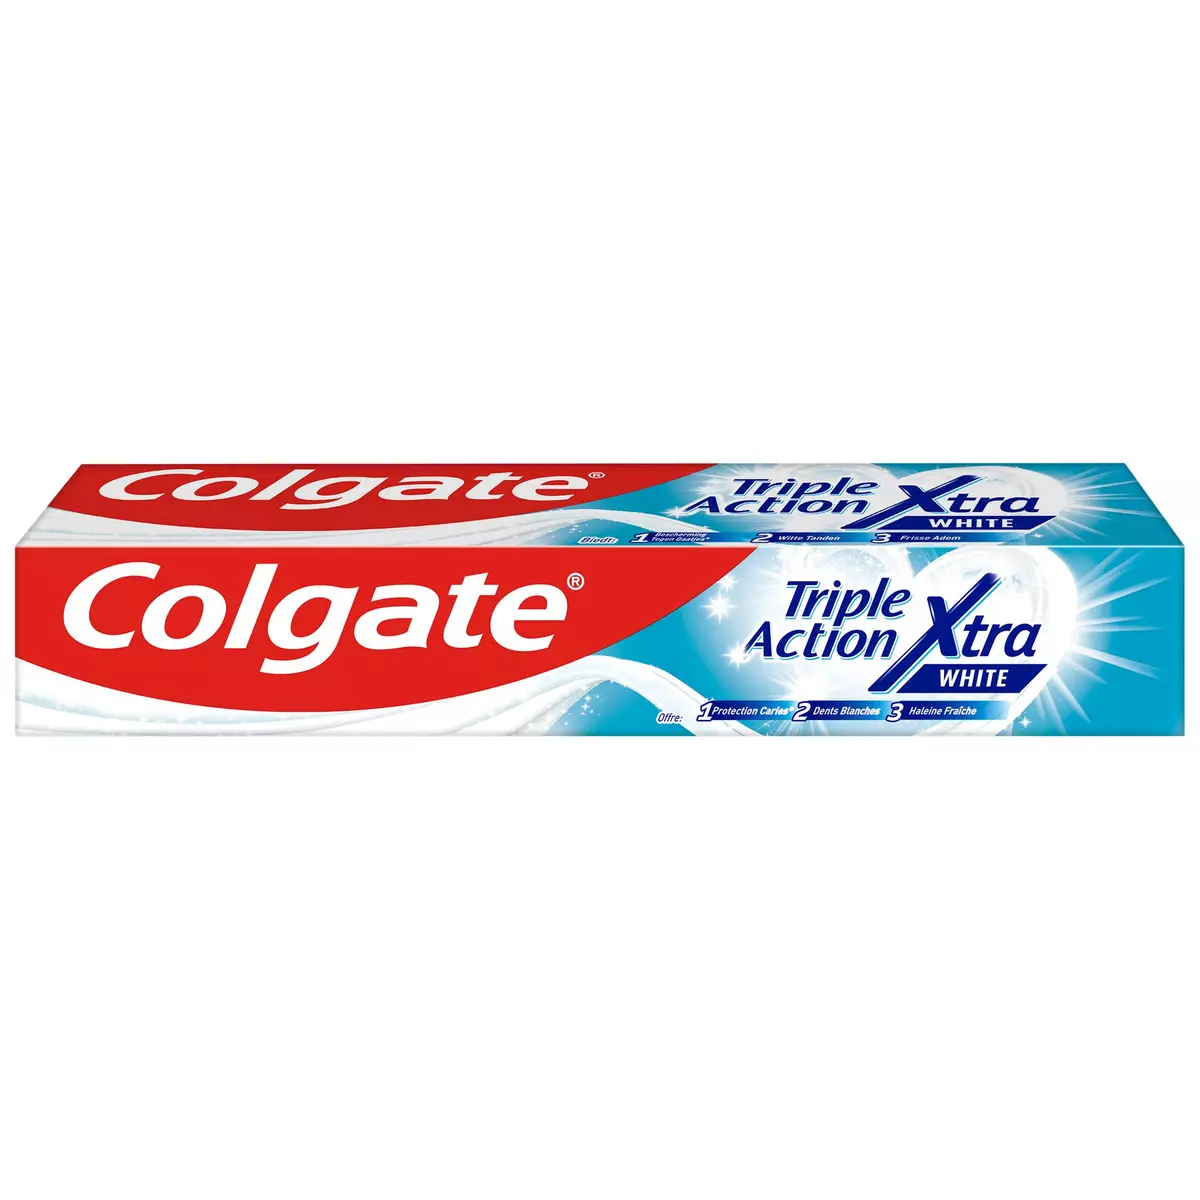 COLGATE Dentifrice triple action extra white 75ml